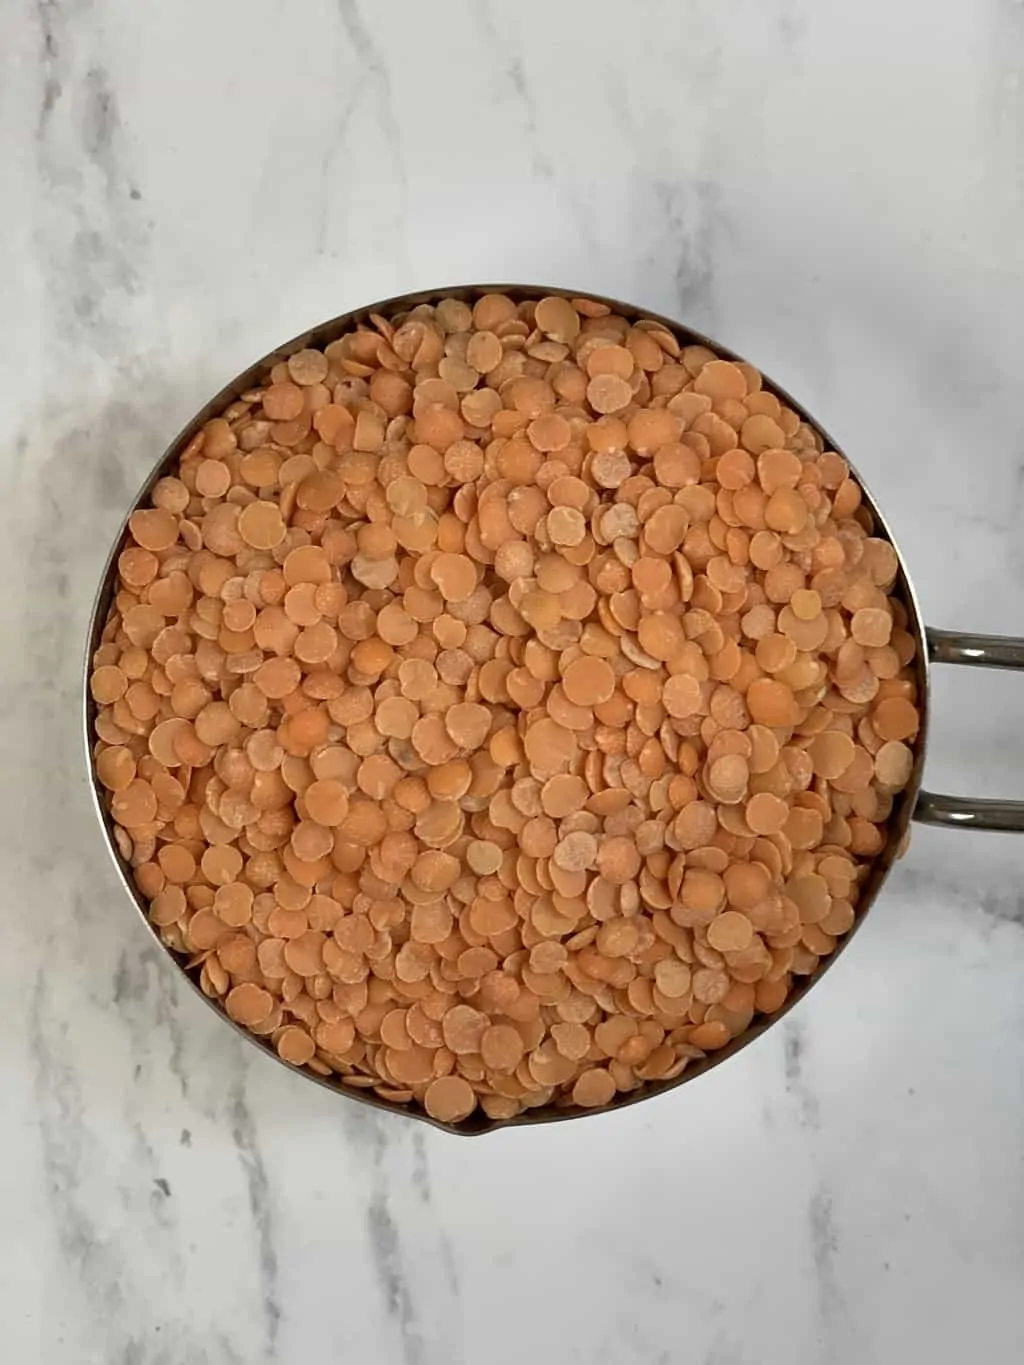 red lentils in a measuring cup